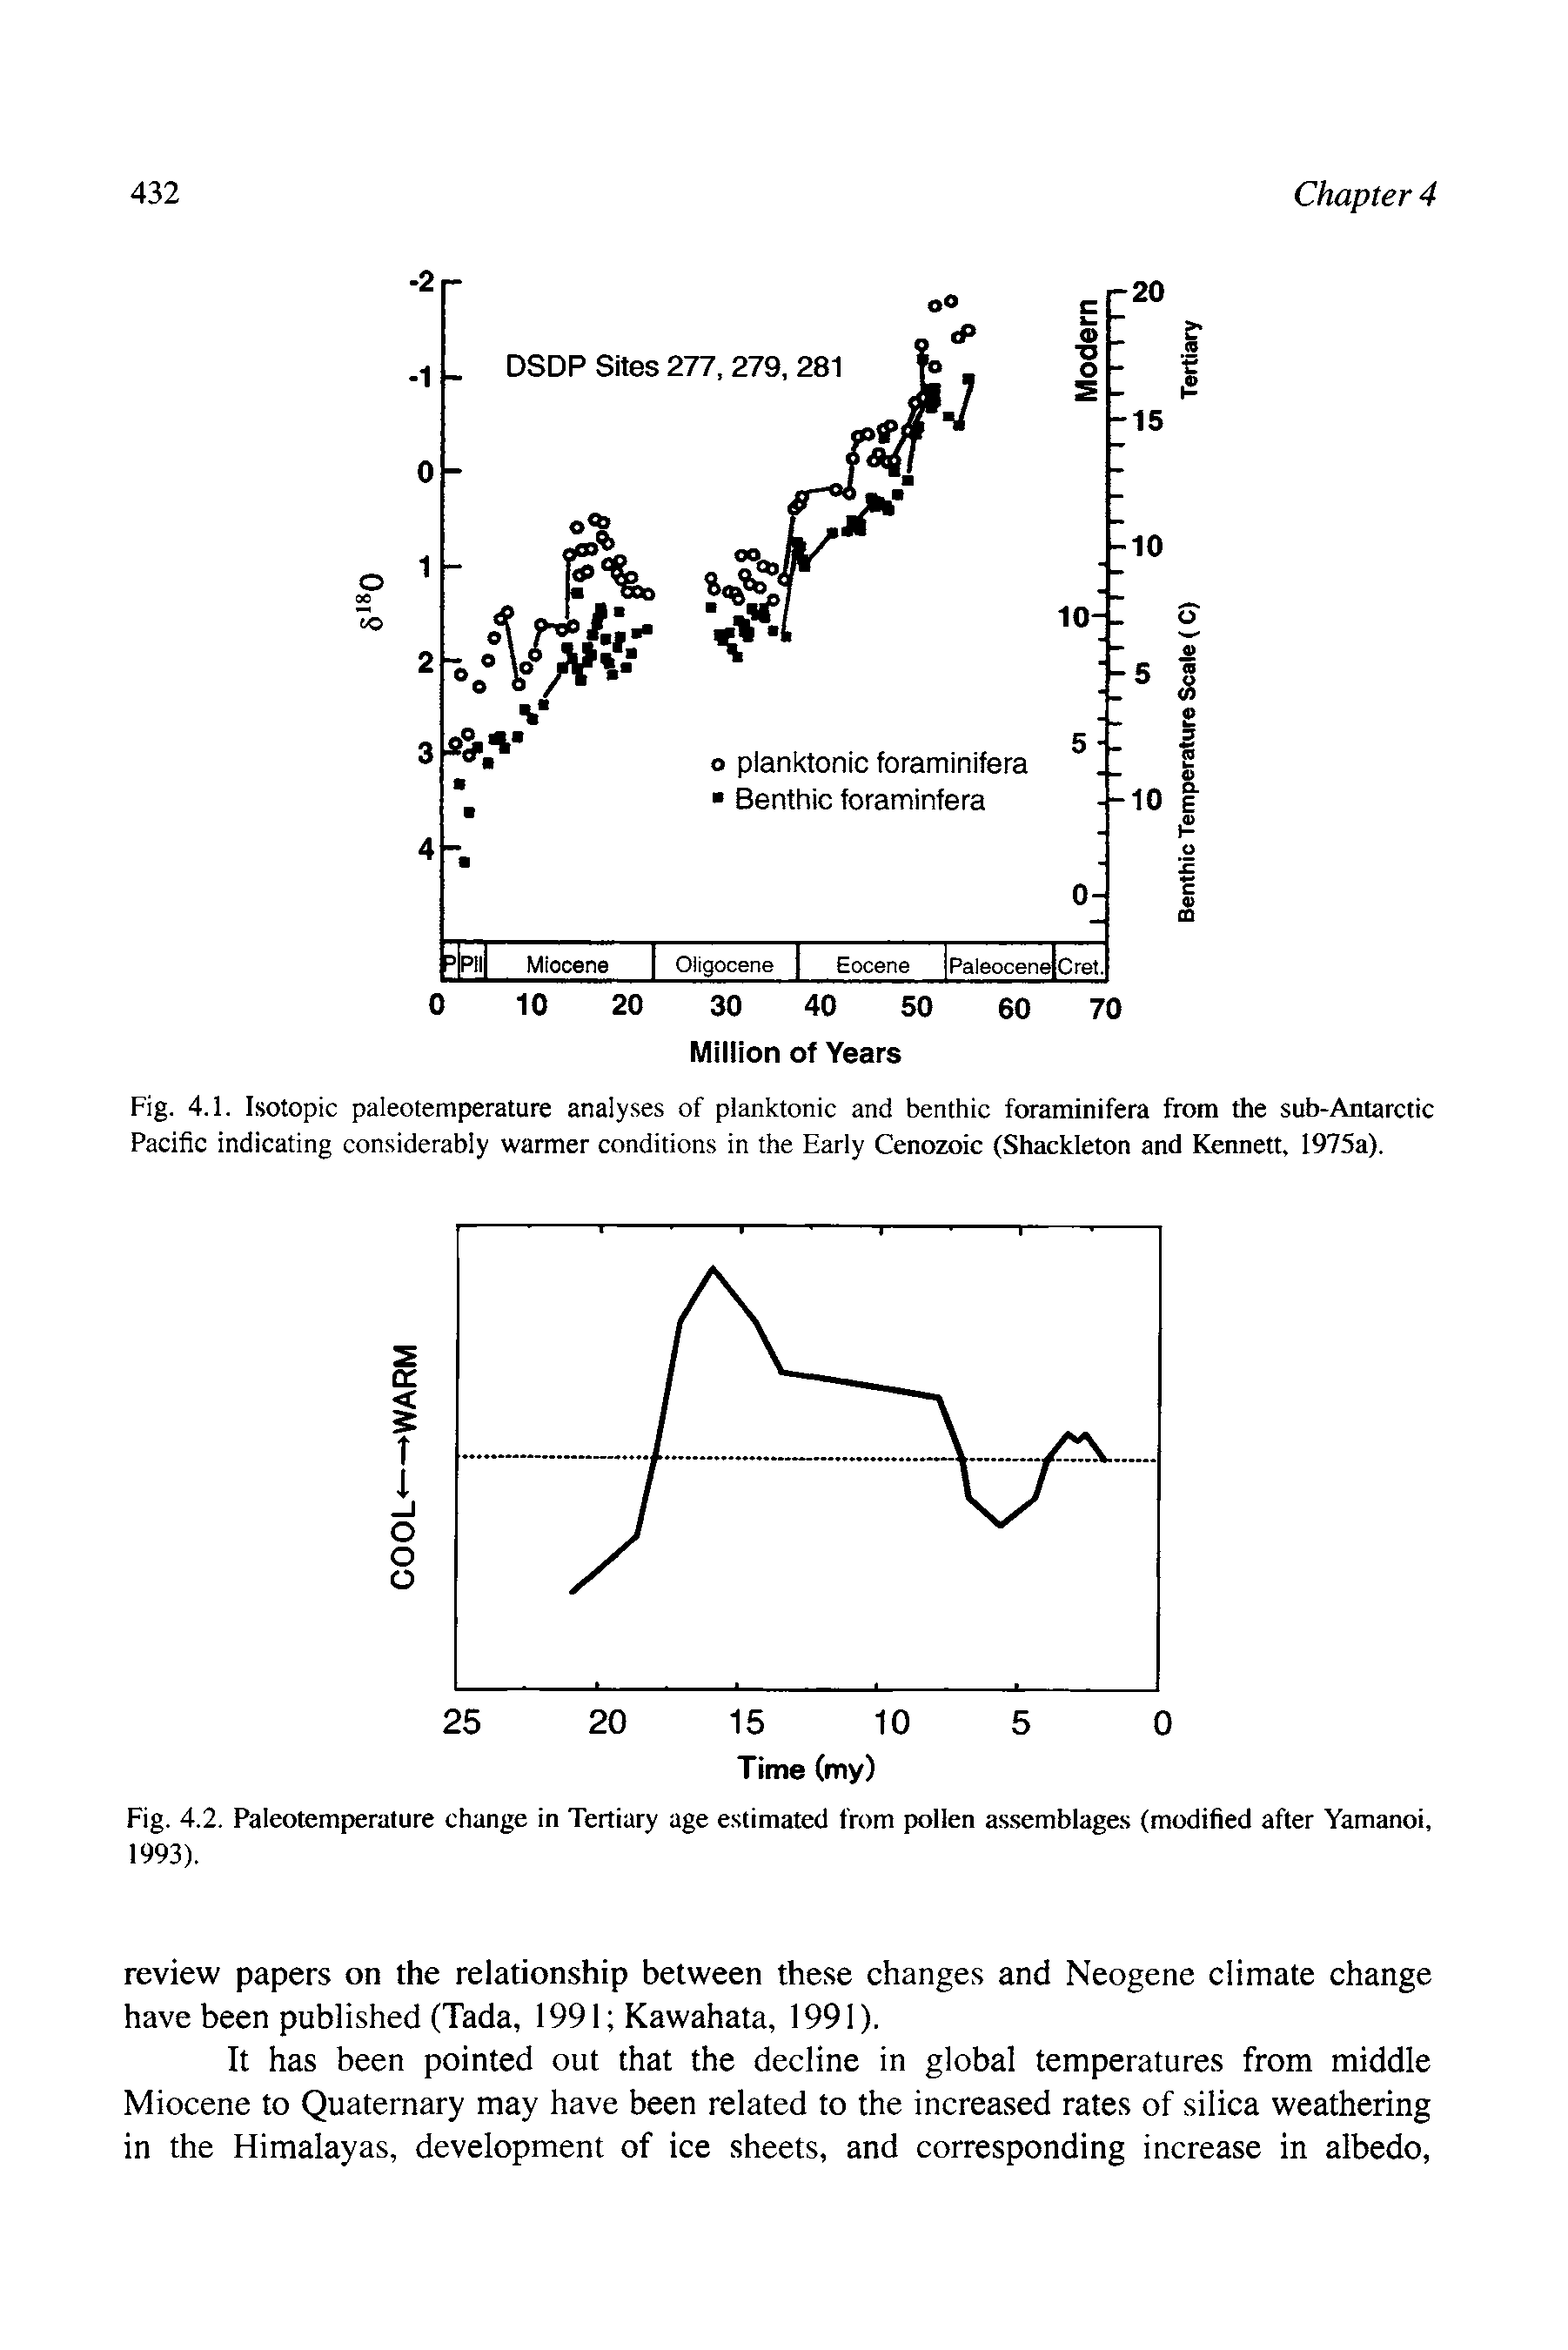 Fig. 4.1. Isotopic paleotemperature analyses of planktonic and benthic foraminifera from the sub-Antarctic Pacific indicating considerably warmer conditions in the Early Cenozoic (Shackleton and Kennett, 1975a).